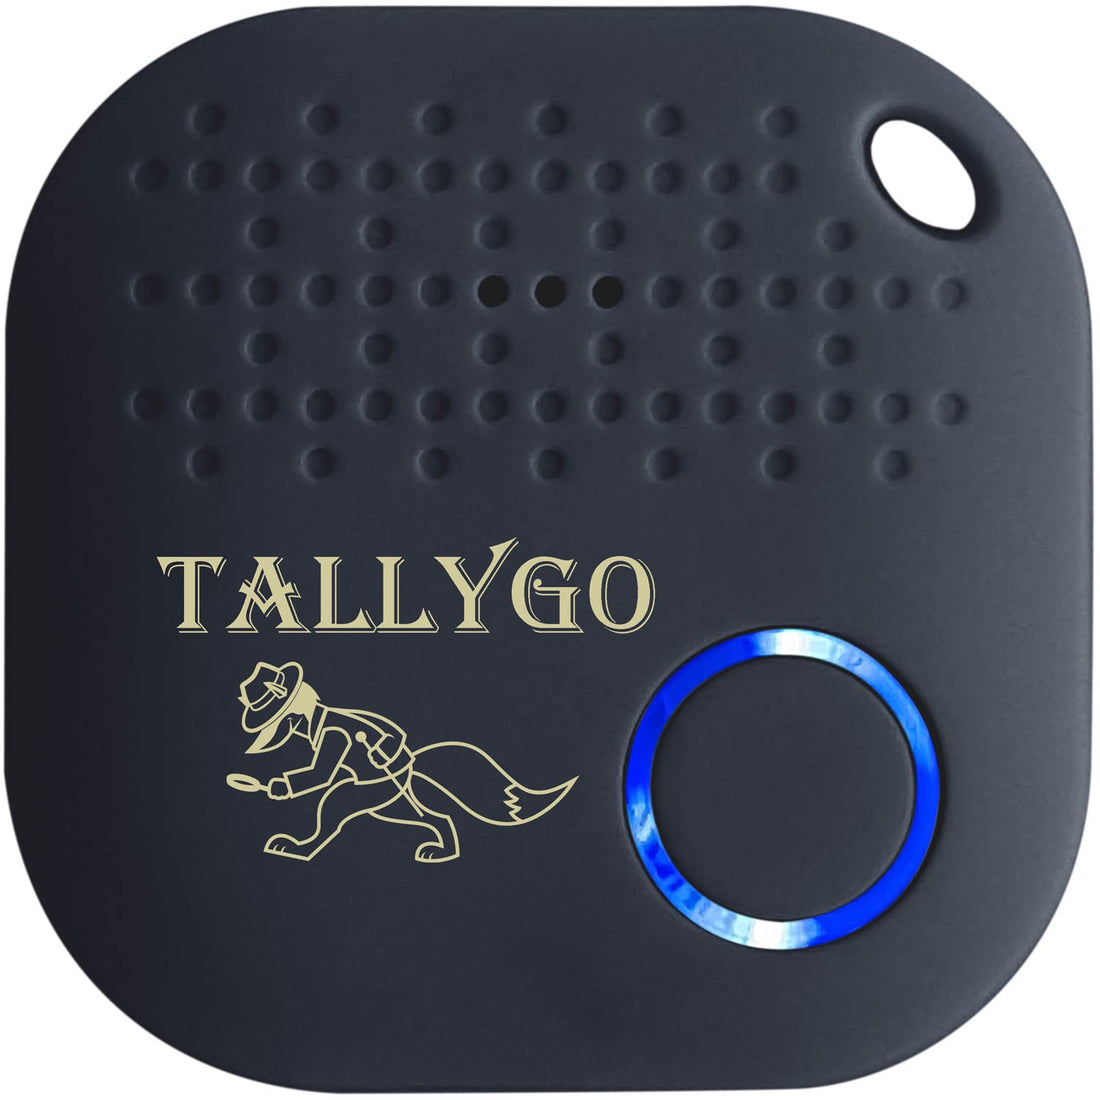 Bluetooth Asset Tracker - Key Finder, Item Tracker, Phone Finder, Wallet, Purse, Backpack, Luggage, Extra Batteries, Inventory List, GPS Tracking Tags by TallyGo - (Blue, 1 Pack)